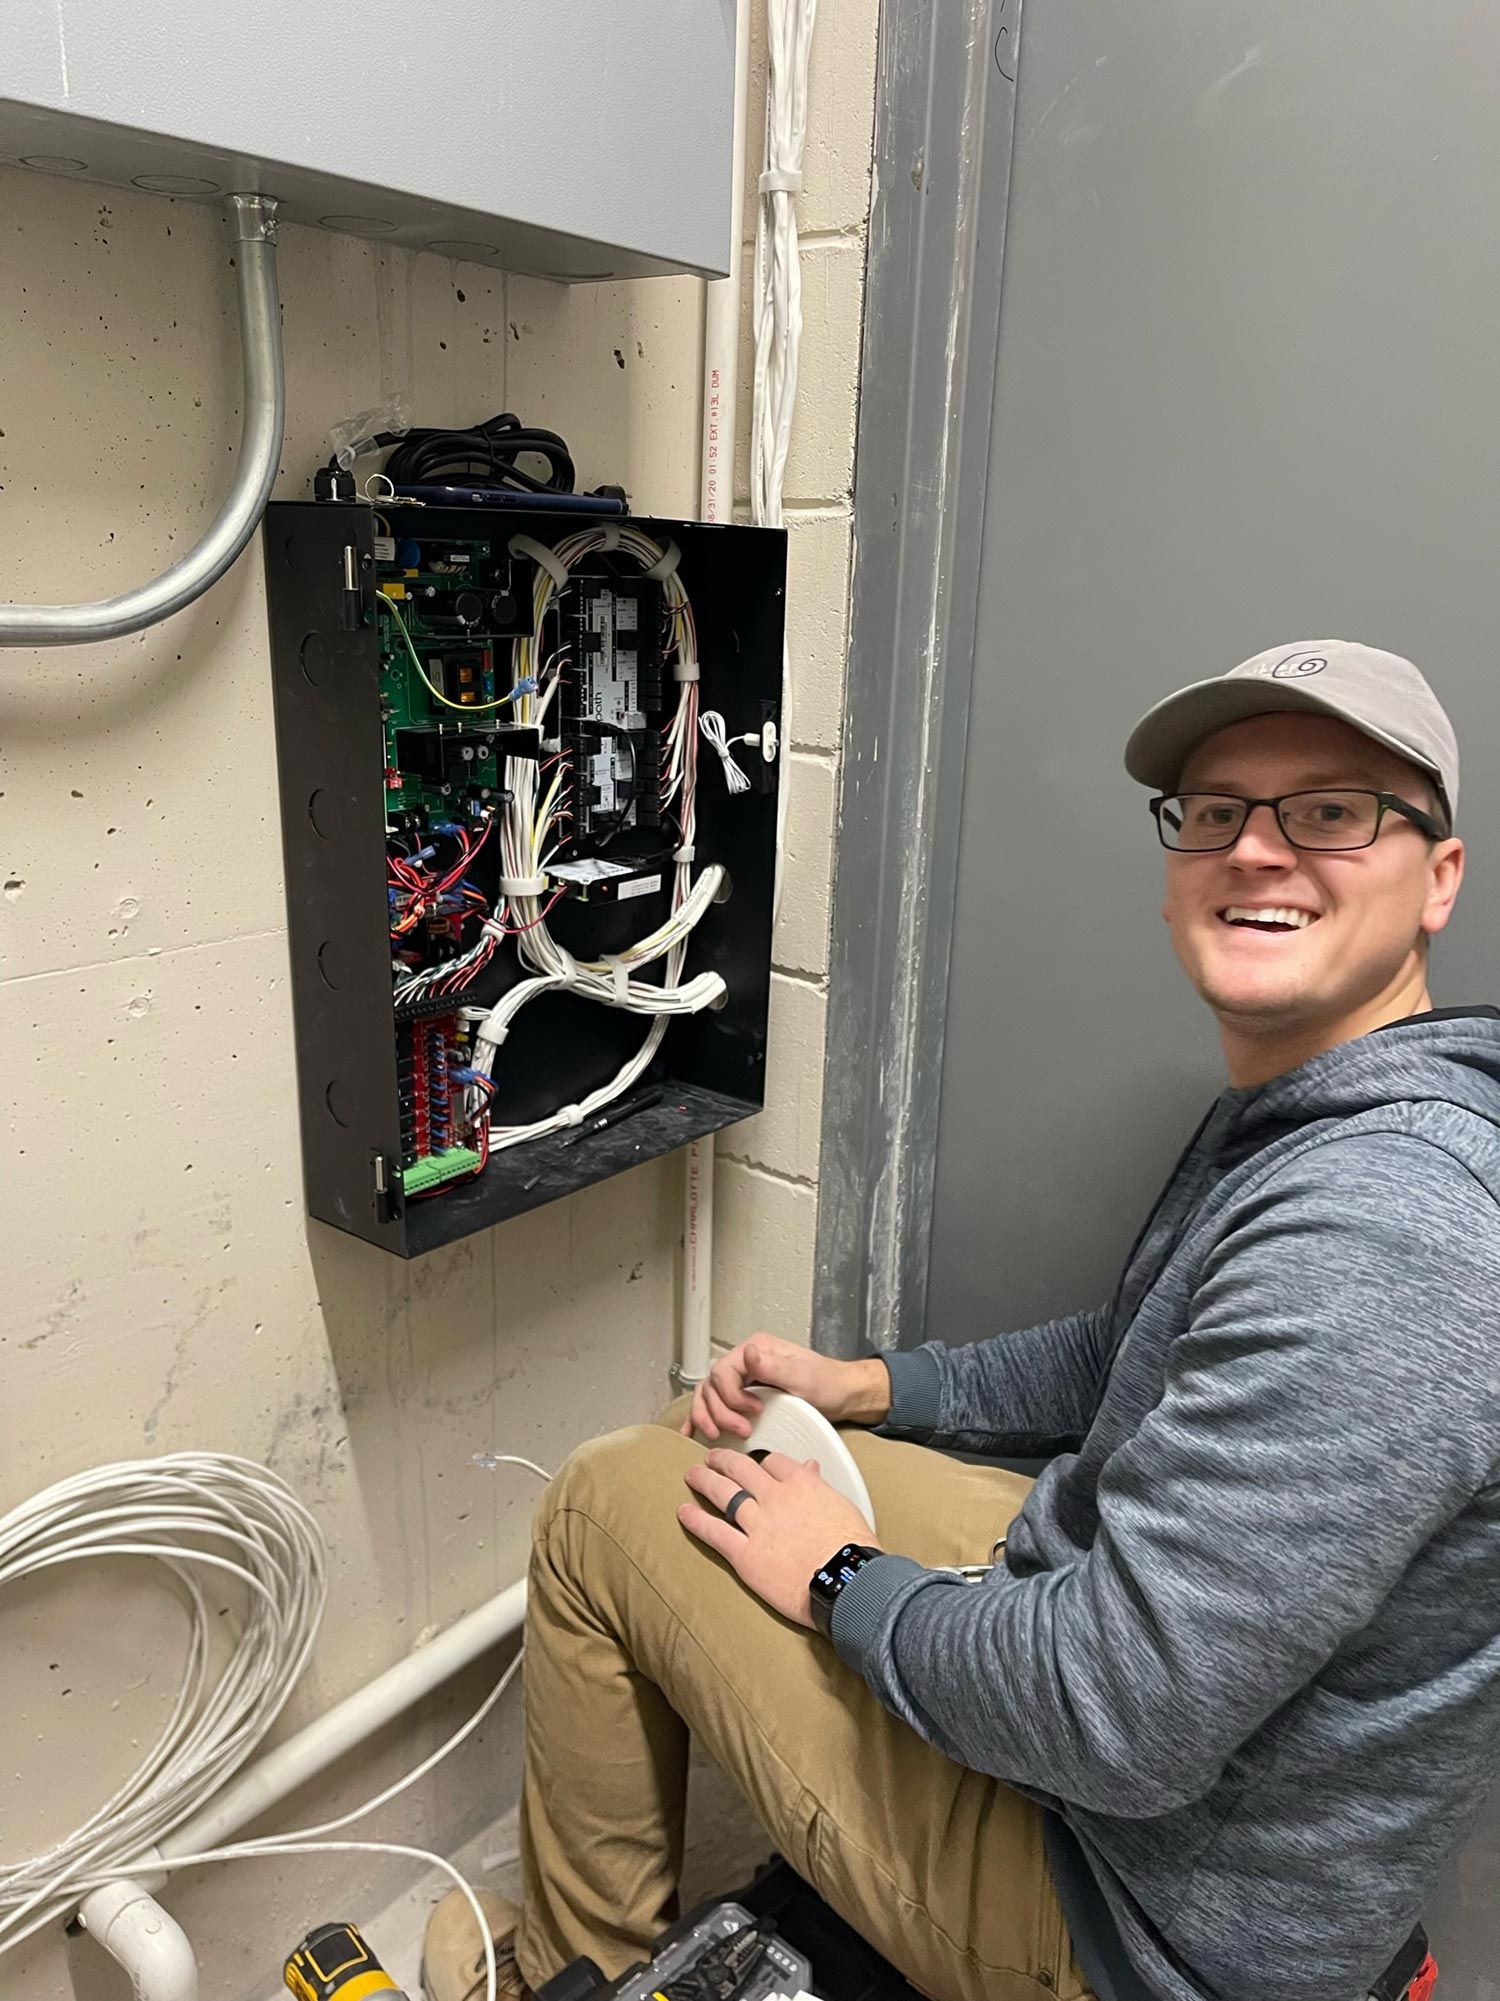 Man smiling with an electrical board